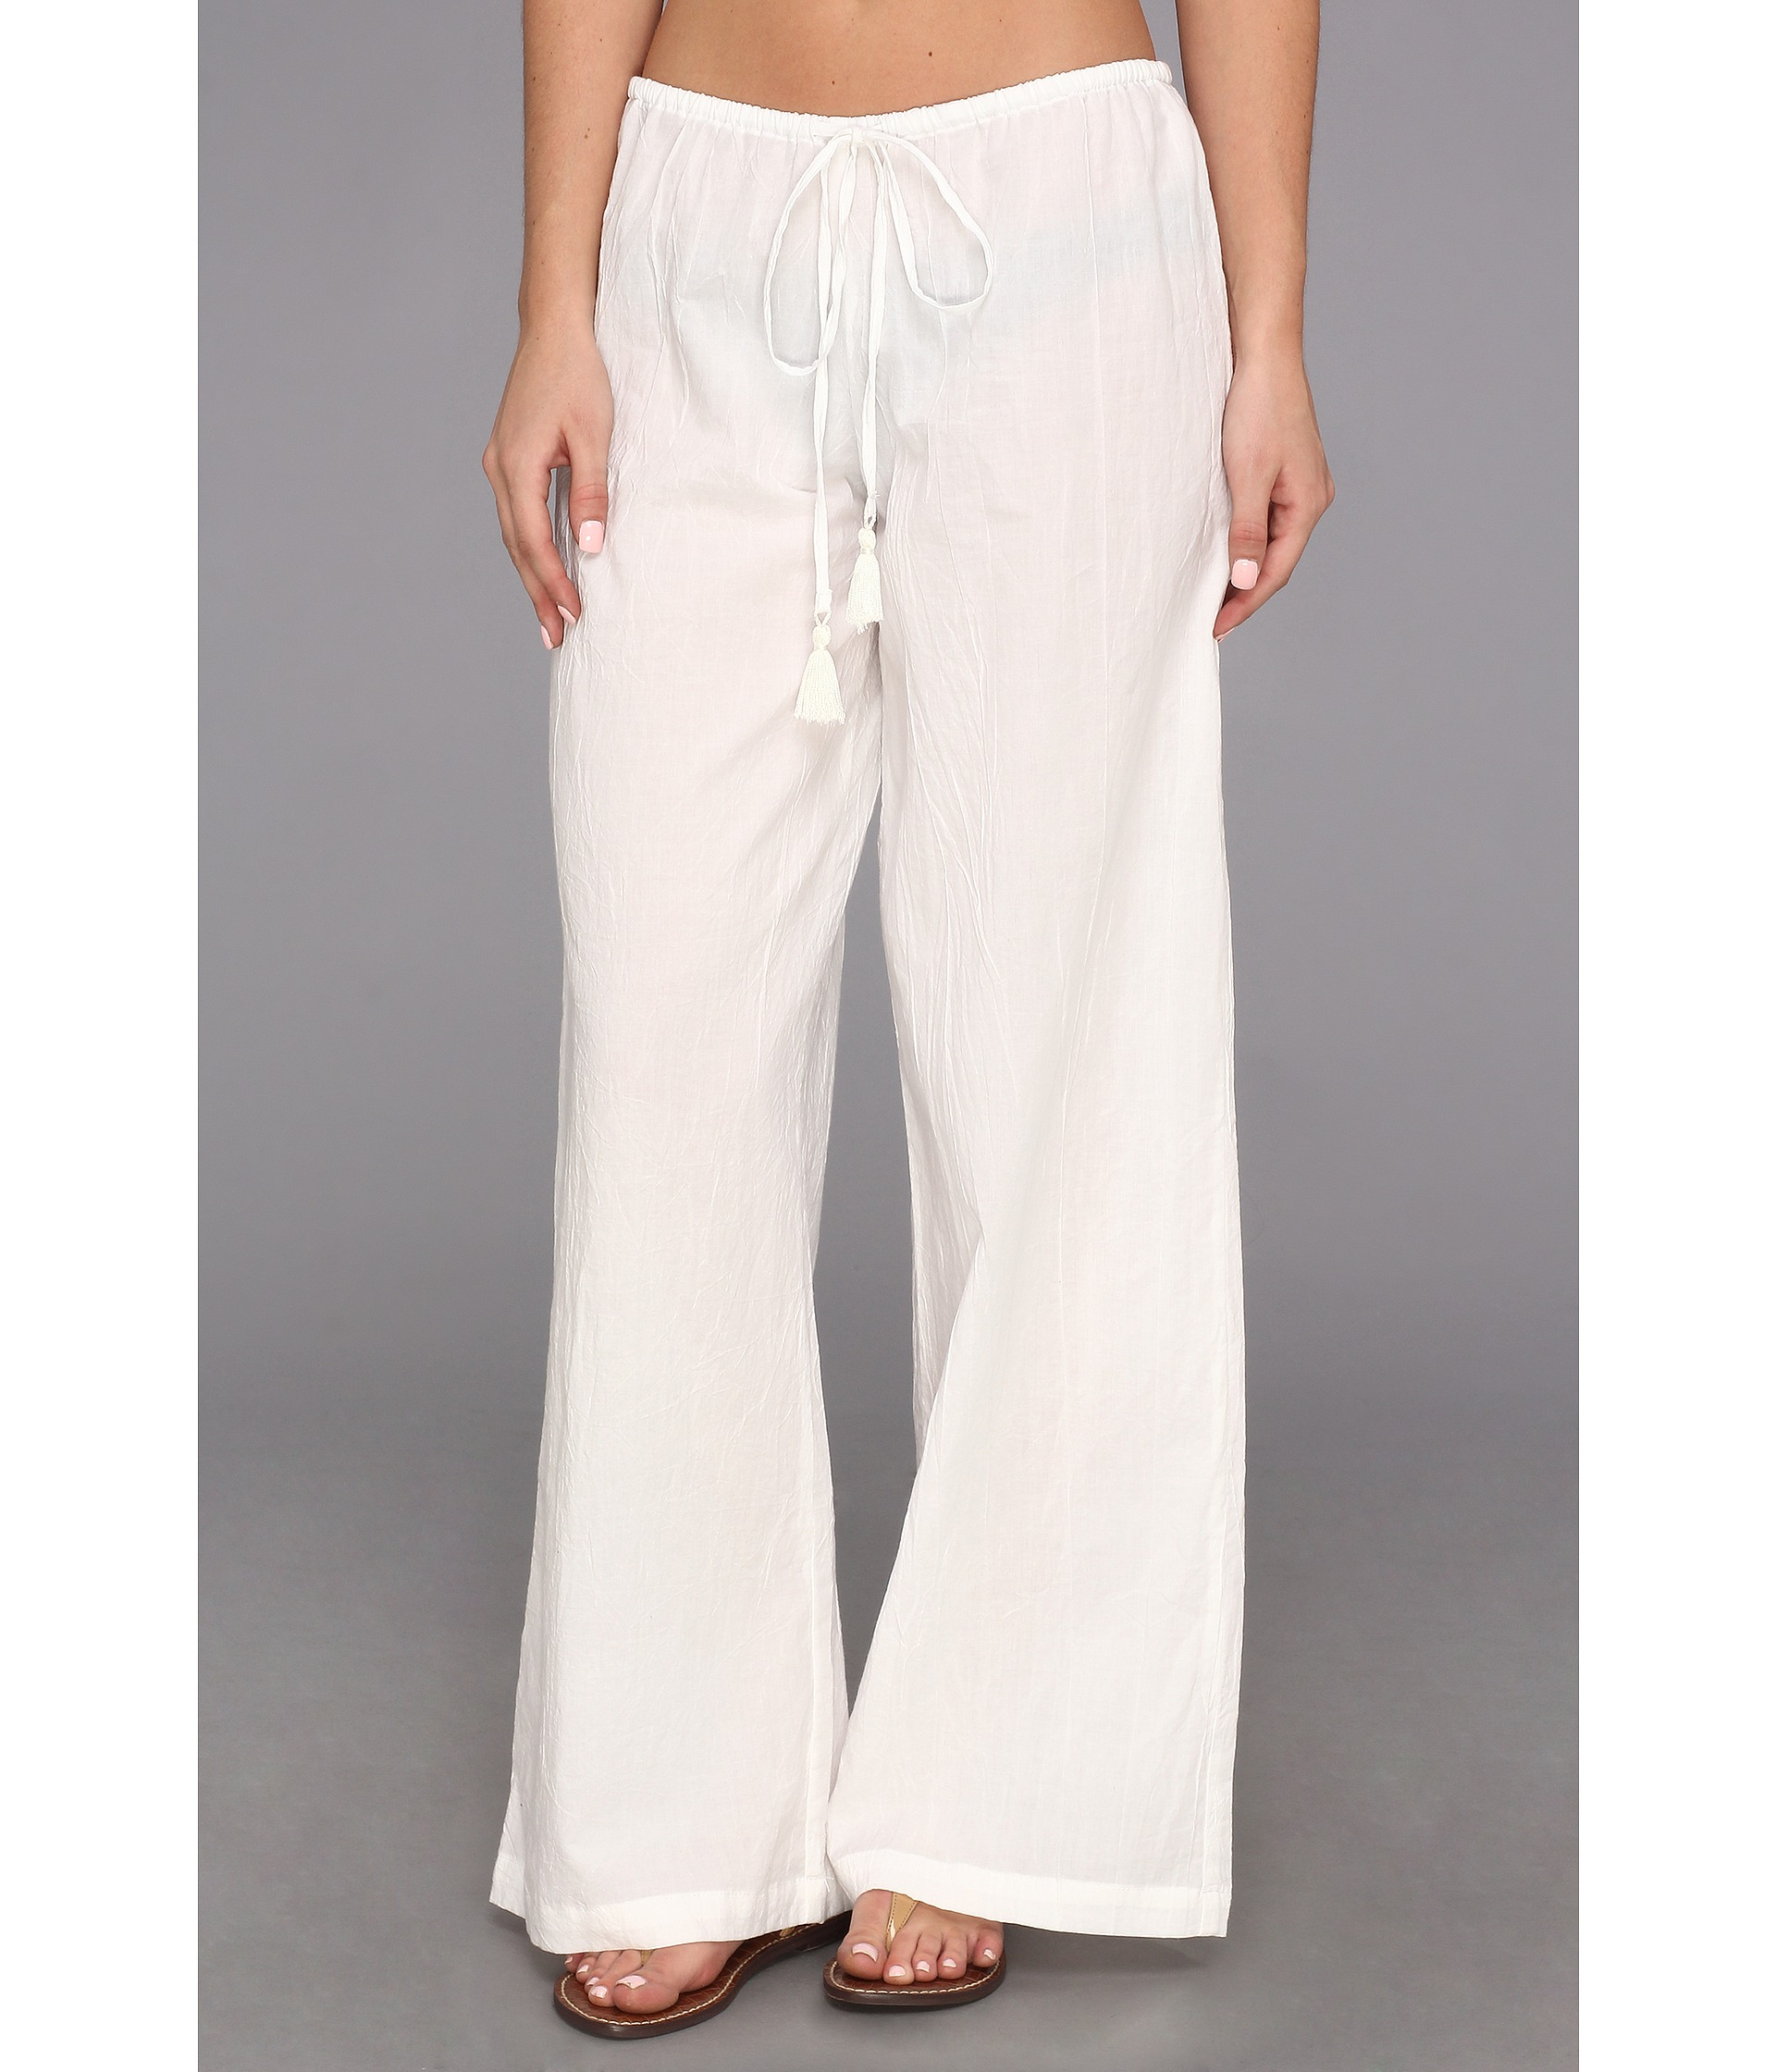 Tommy Bahama Crinkle Cotton Drawstring Long Pant W Tassels in White - Lyst